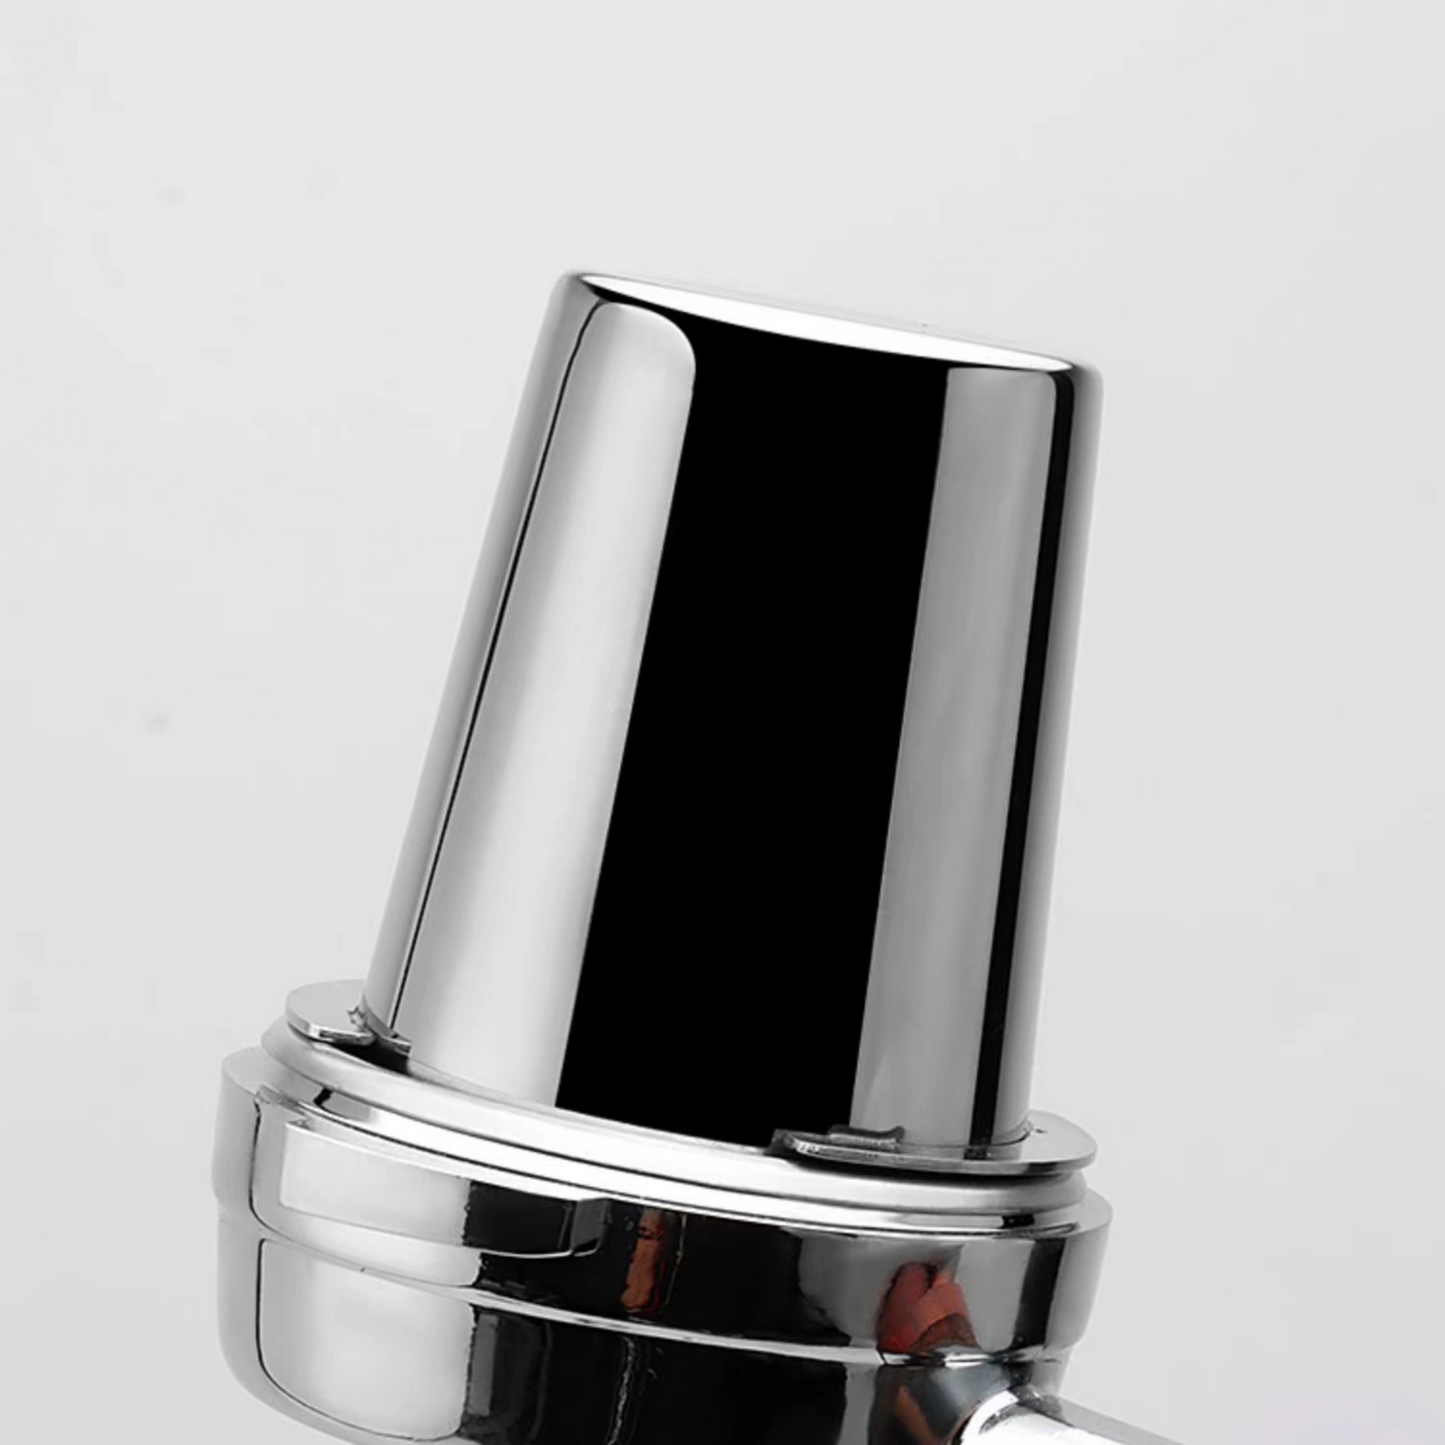 Stainless Steel Coffee Dosing Cup